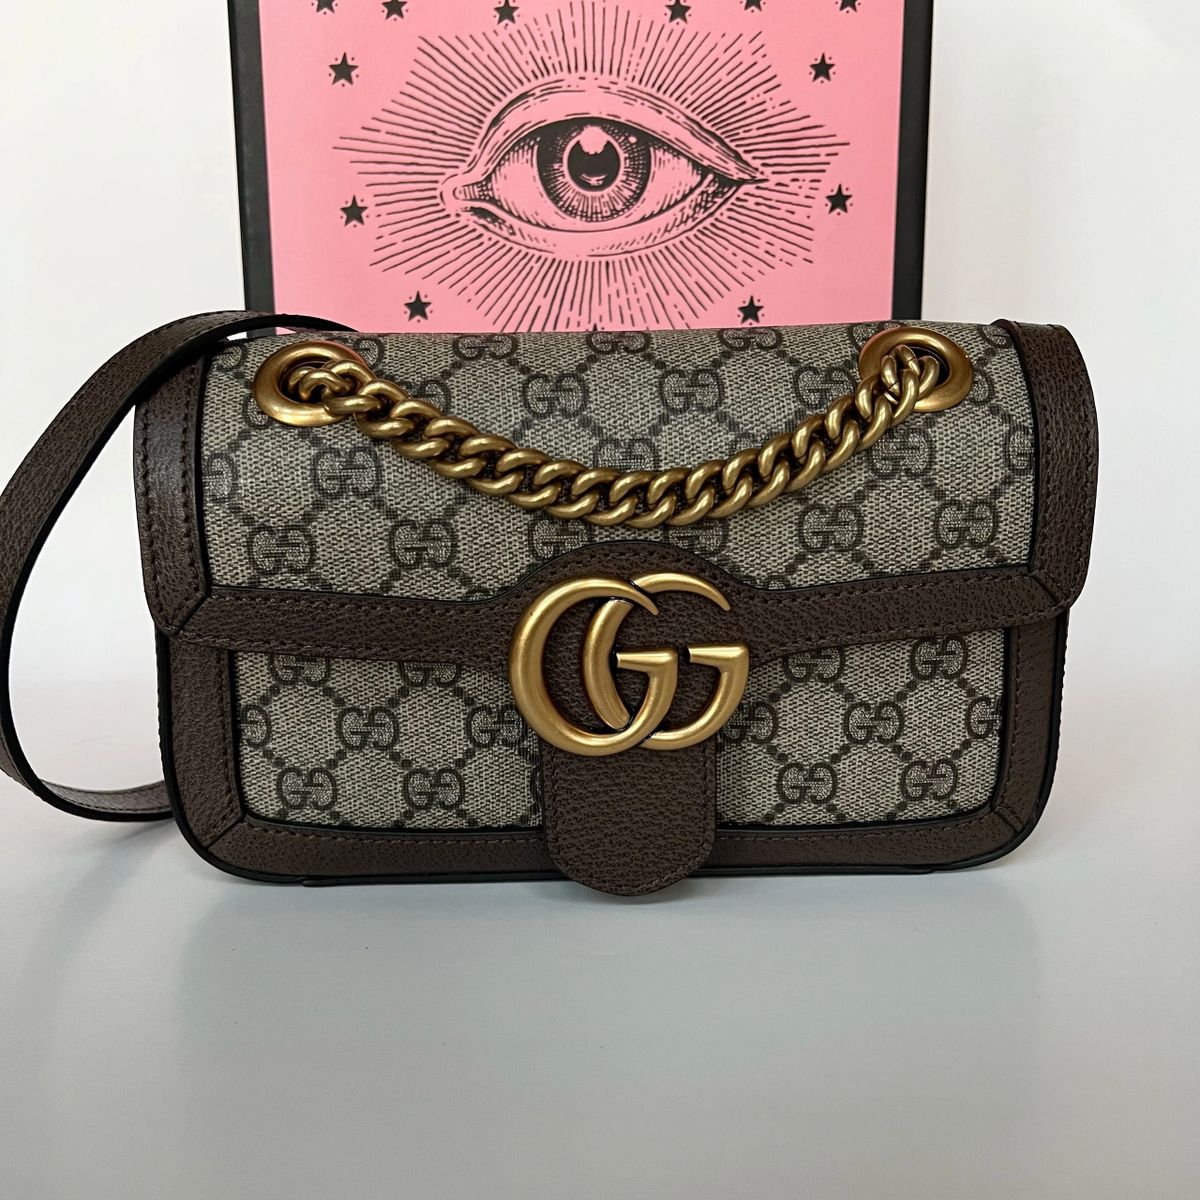 GUCCI LIMITED EDITION OPHIDIA GG MARMONT MINI SHOULDER BAG